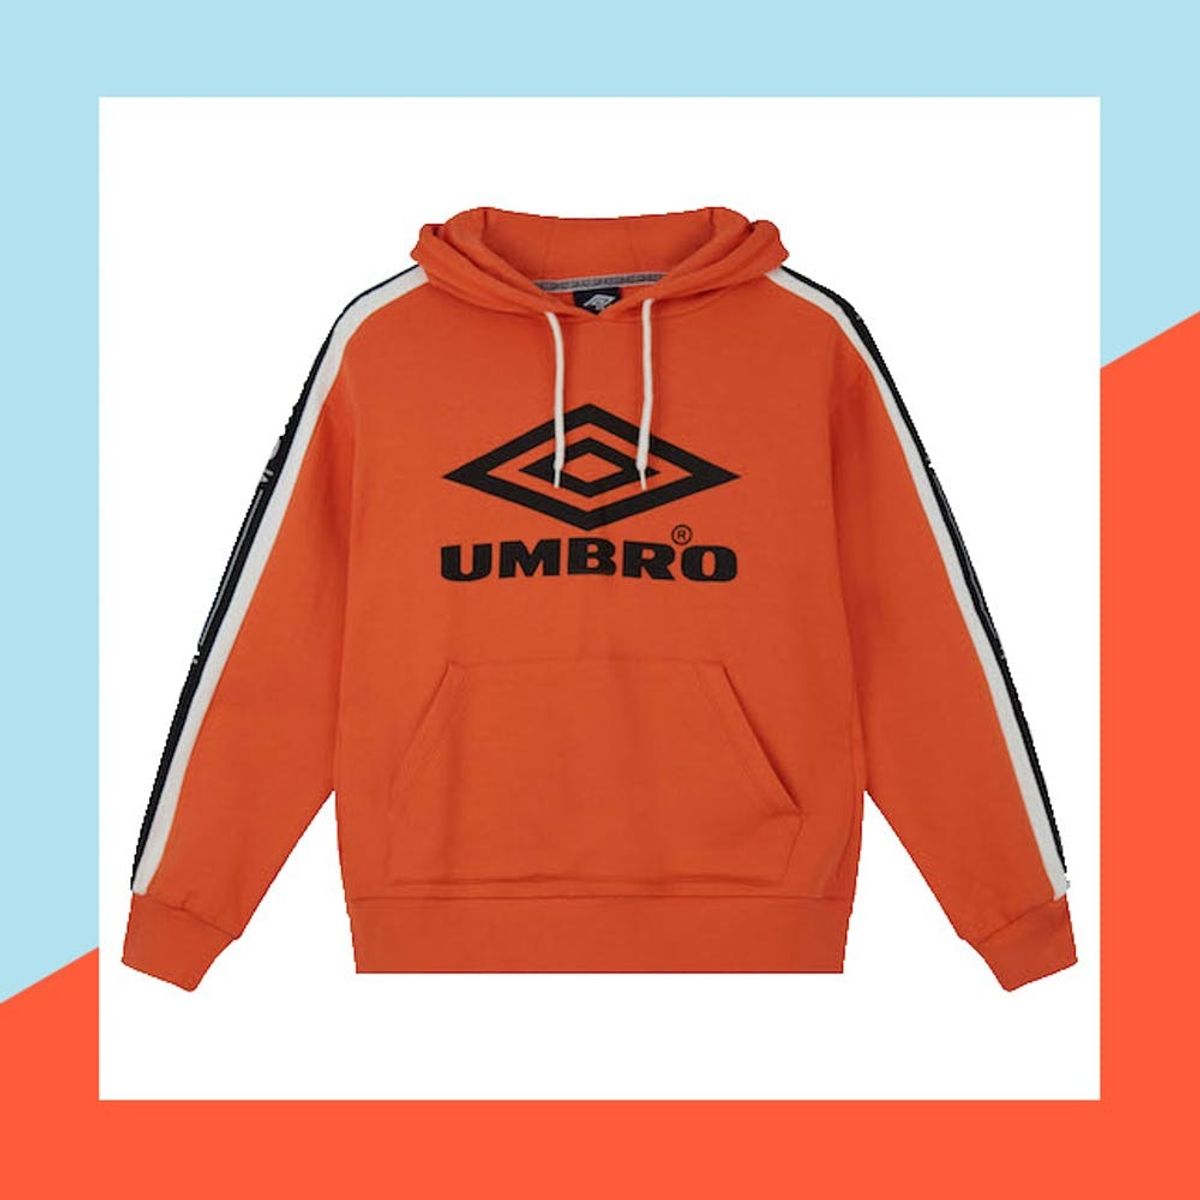 Umbro Reclaims Its Throne As the O.G. Athleisure Brand With ASOS Collab